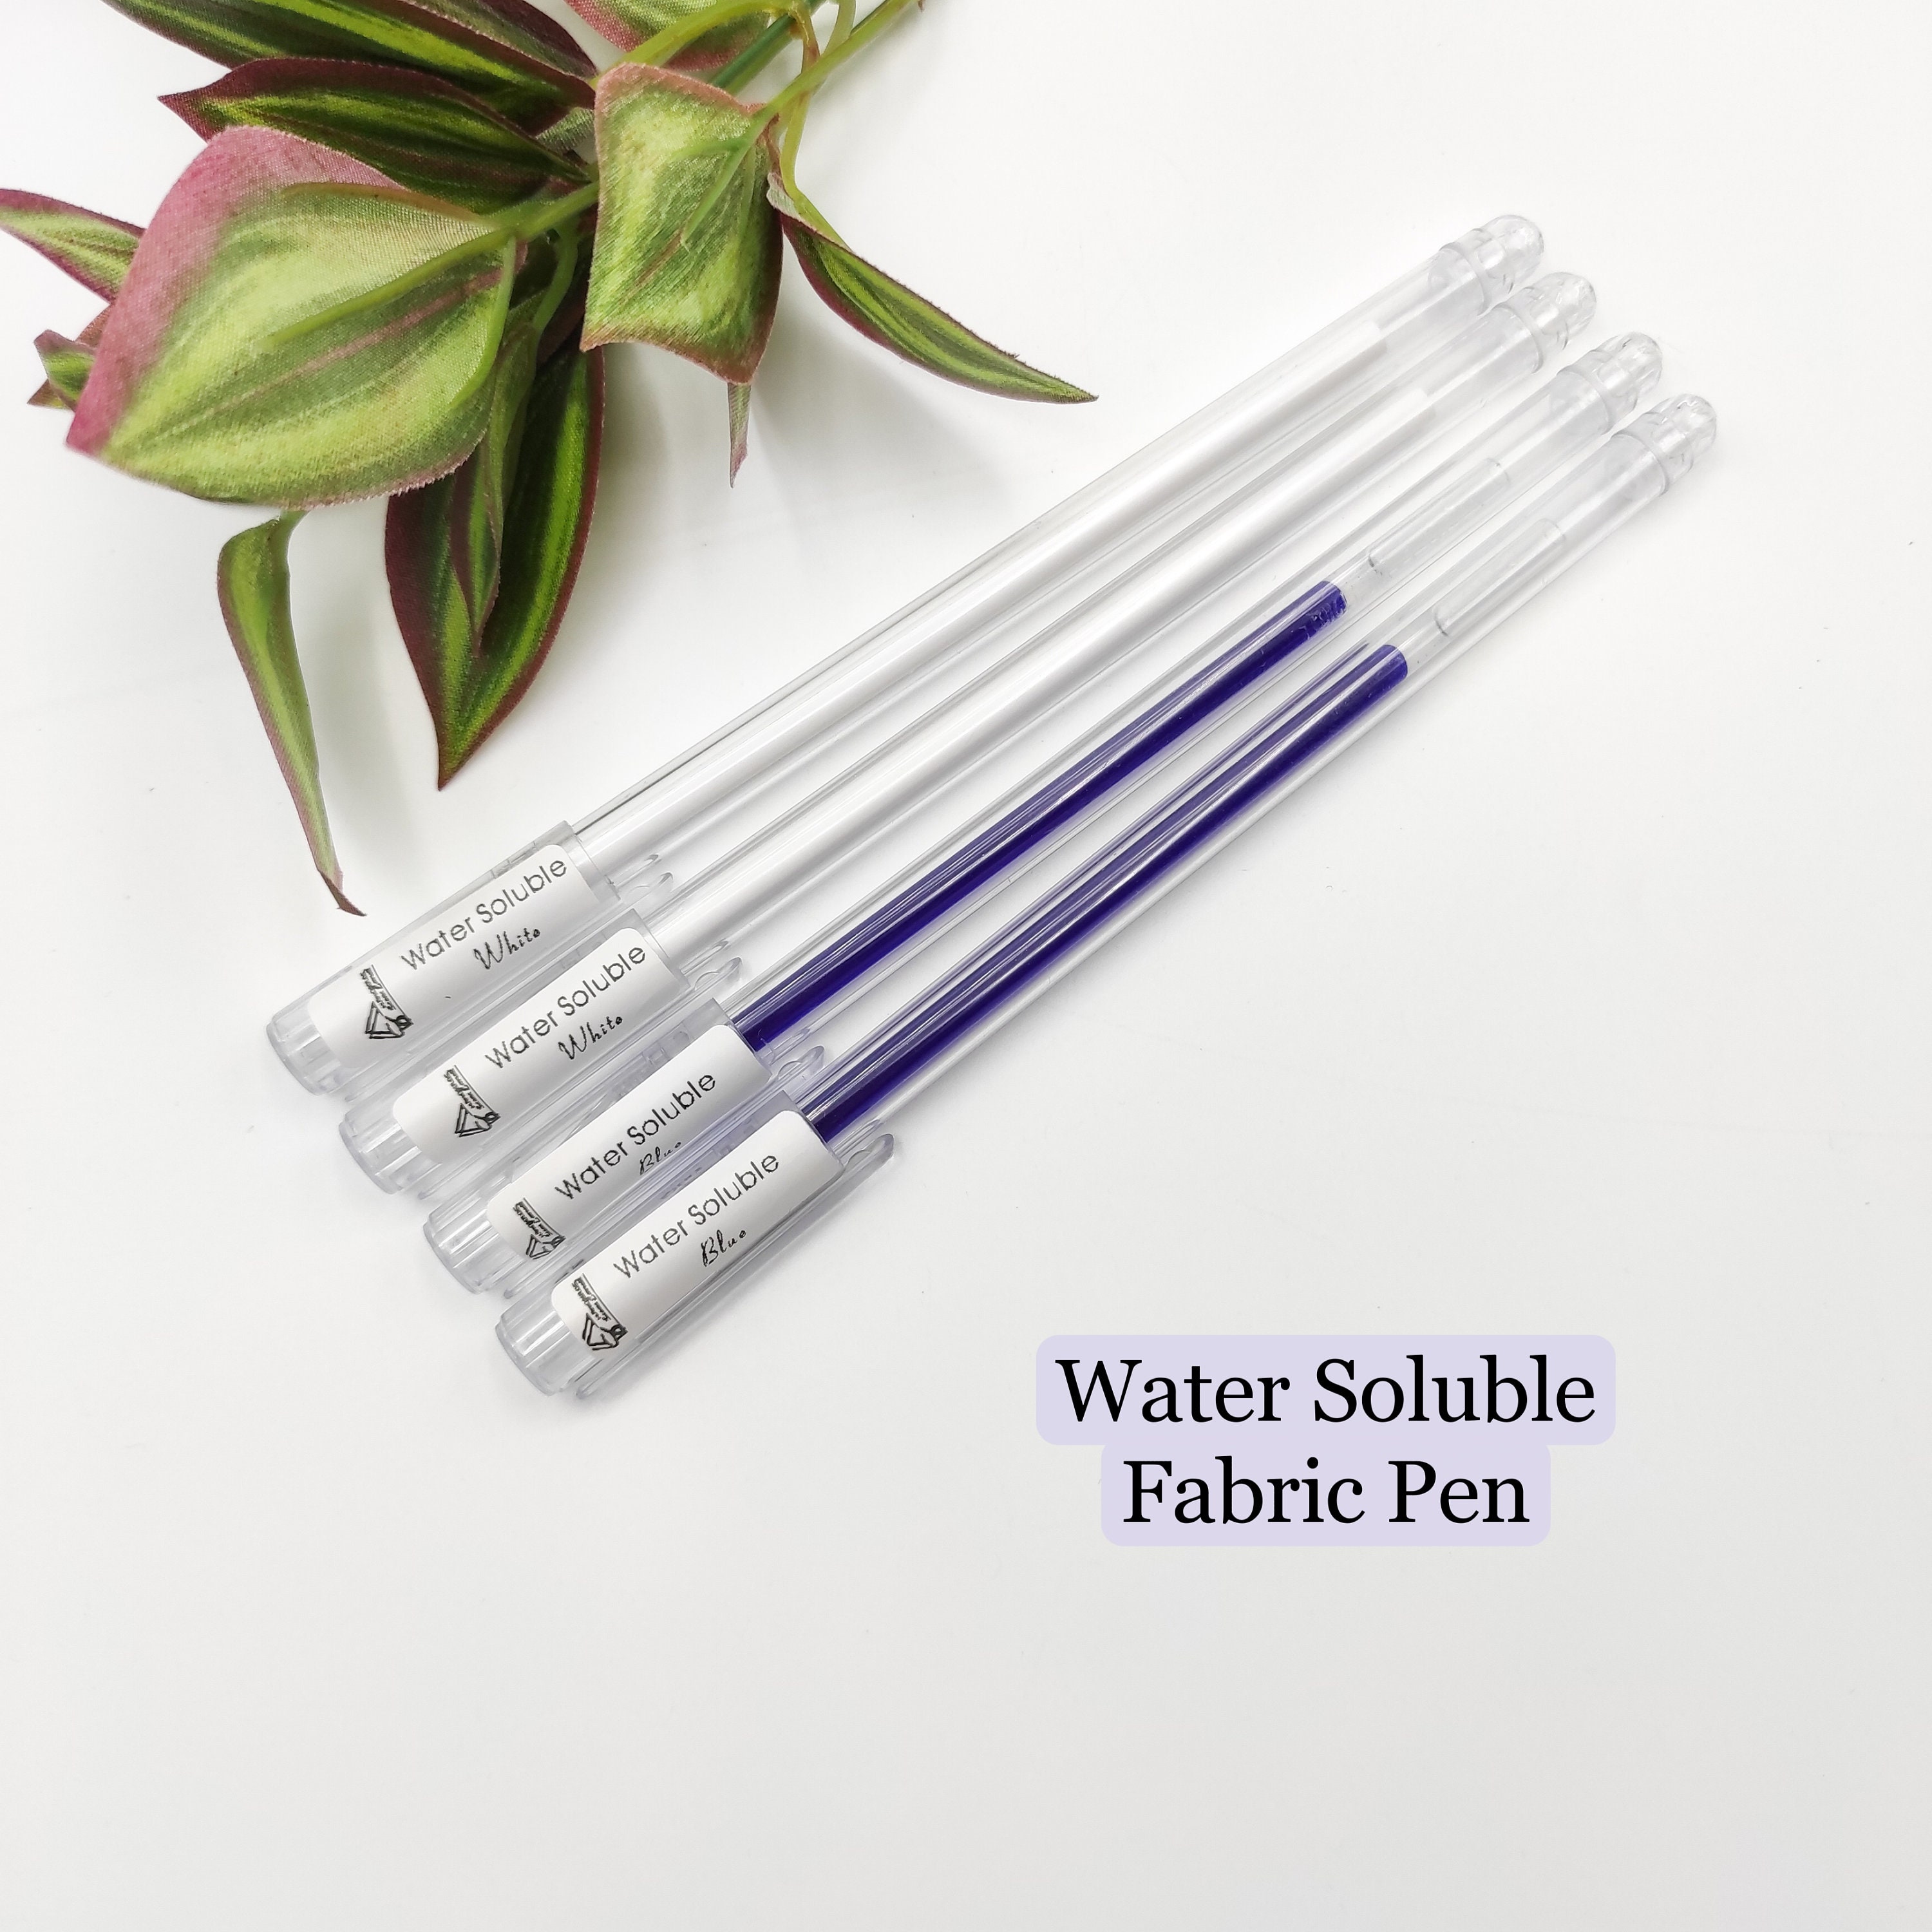 White Fabric Pen, White Roll Pen for Embroidery Pattern Transfer on Dark  Fabric, Embroidery Design Transfer Pen 